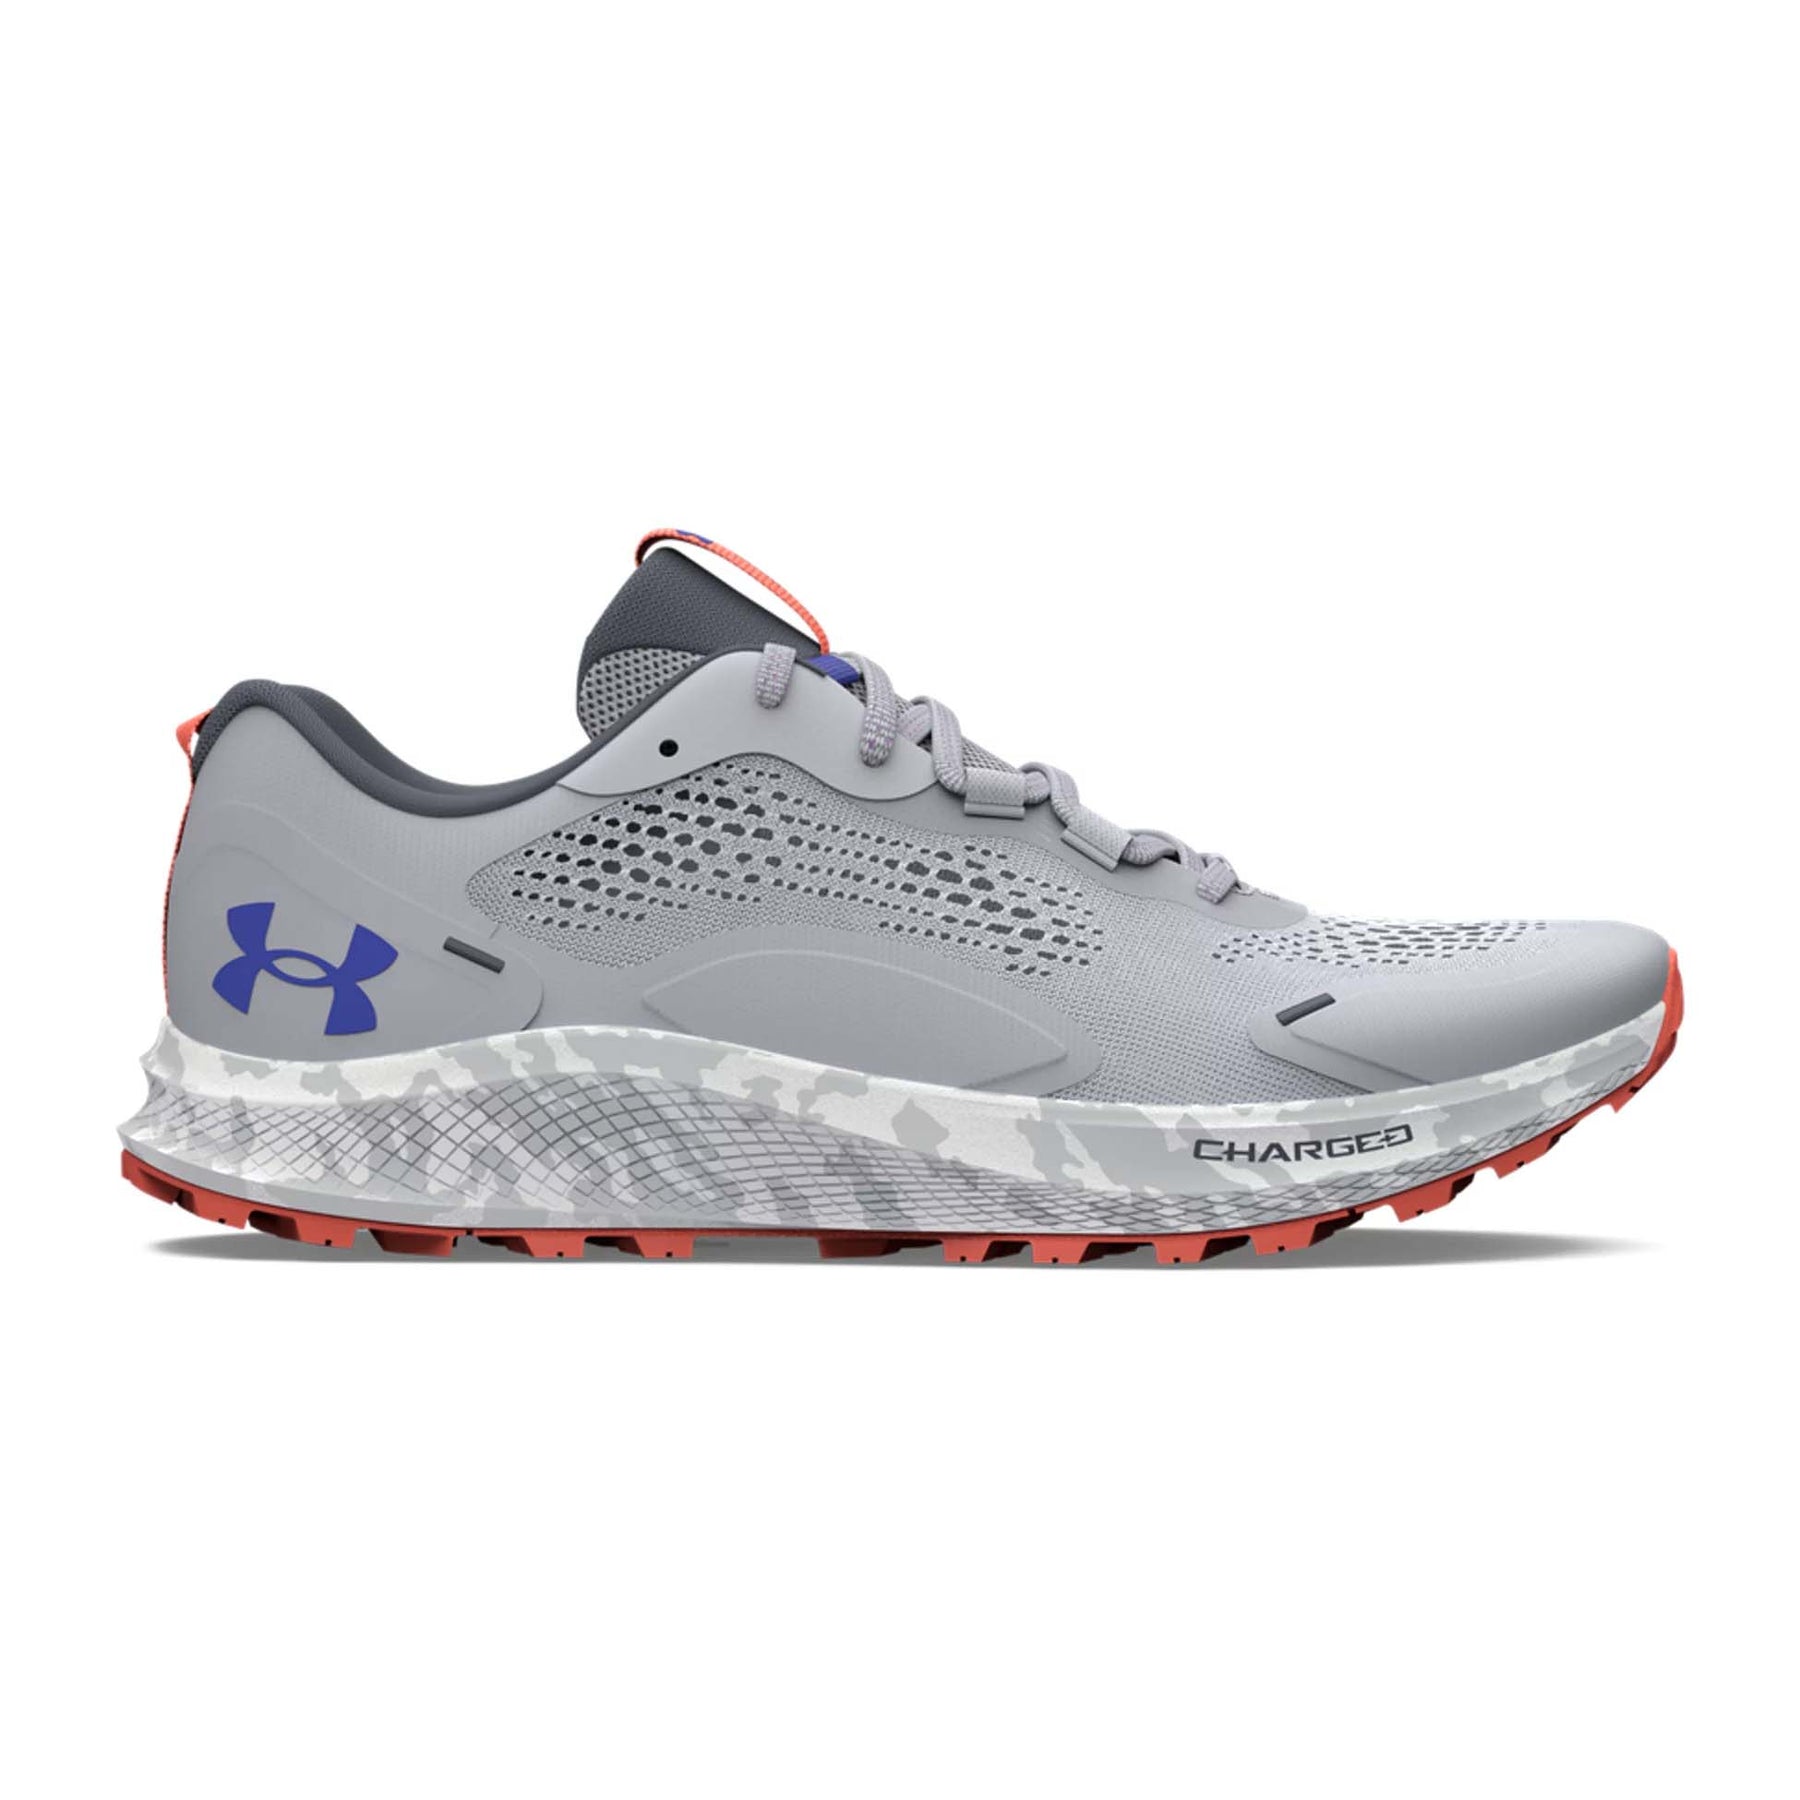 The Under Armour Charged Bandit Trail 2 Womens Trail Running Trainer left side view